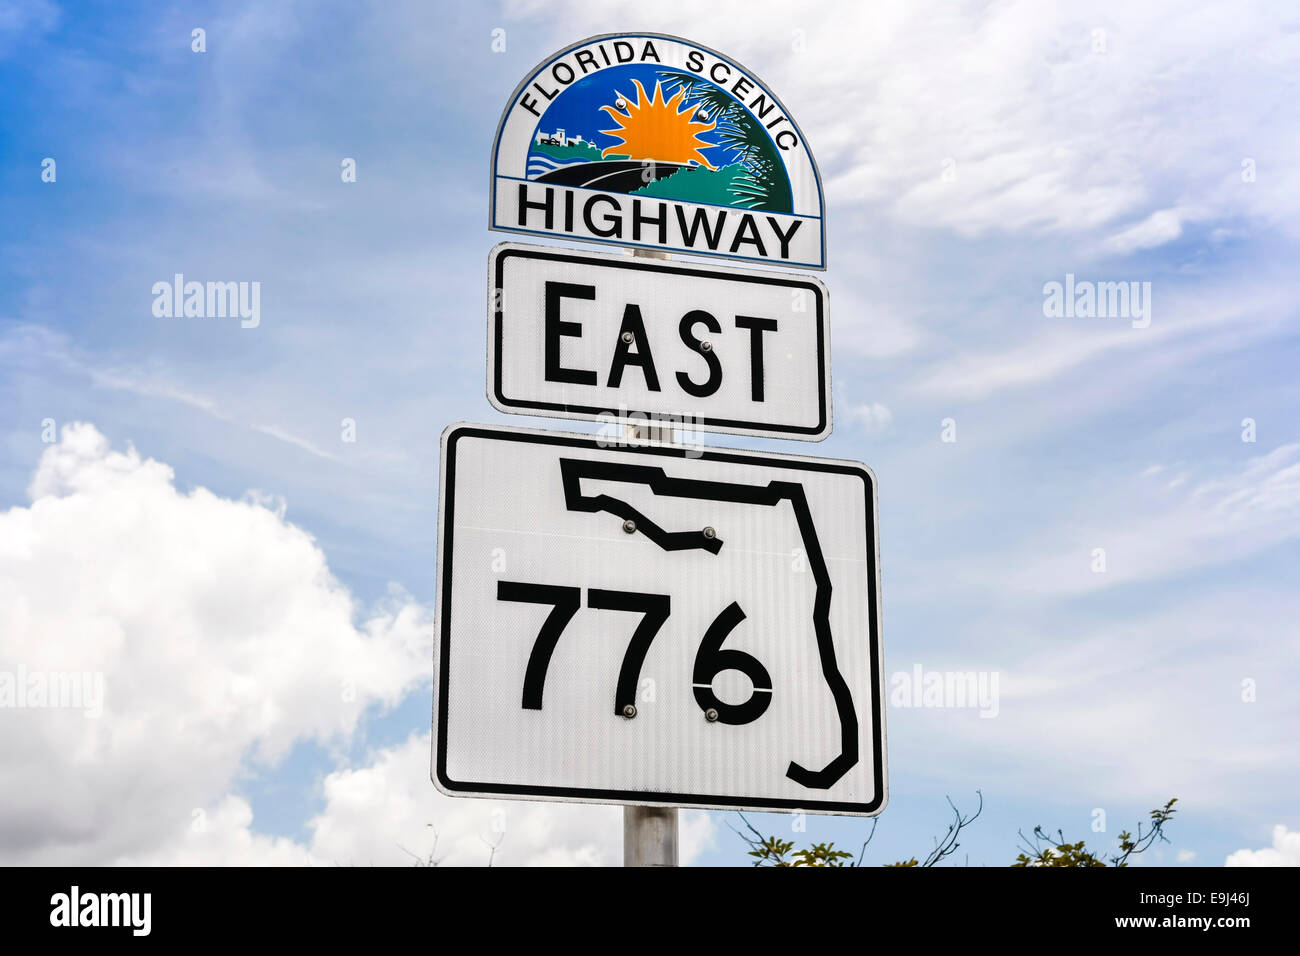 Florida Scenic Highway sign on East 776 Stock Photo